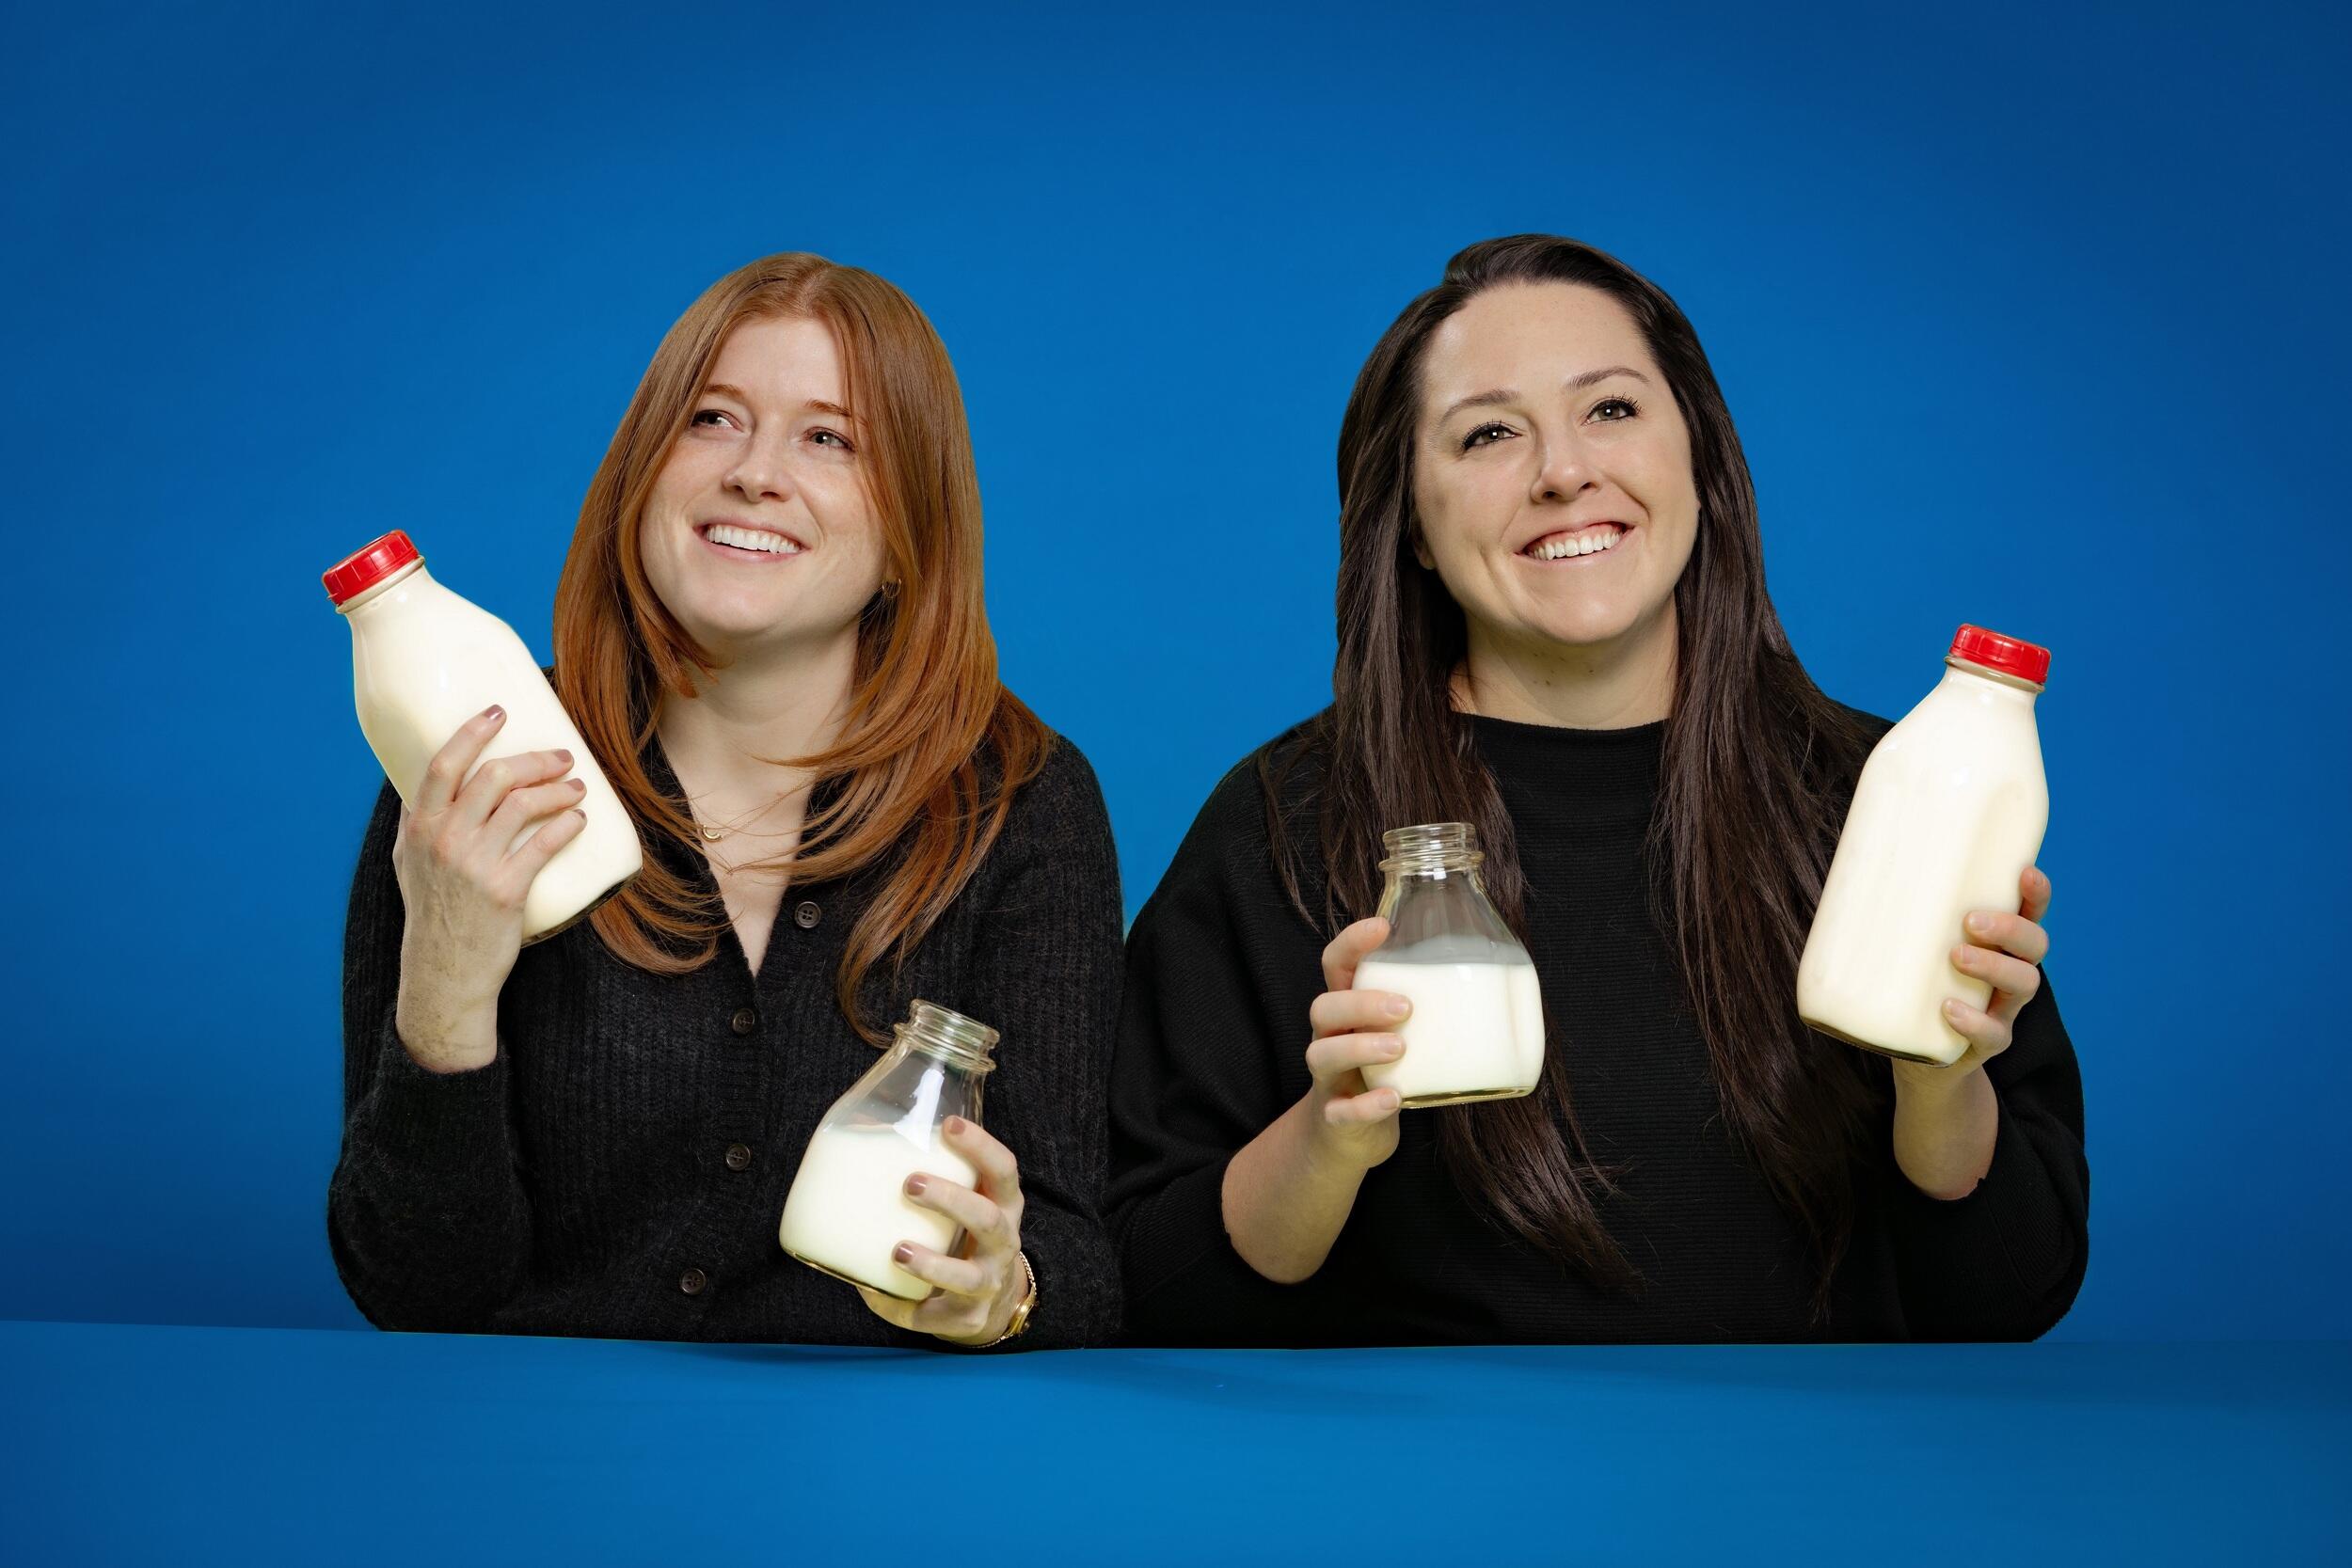 Two women wearing black shirts holding a container of milk in each hand